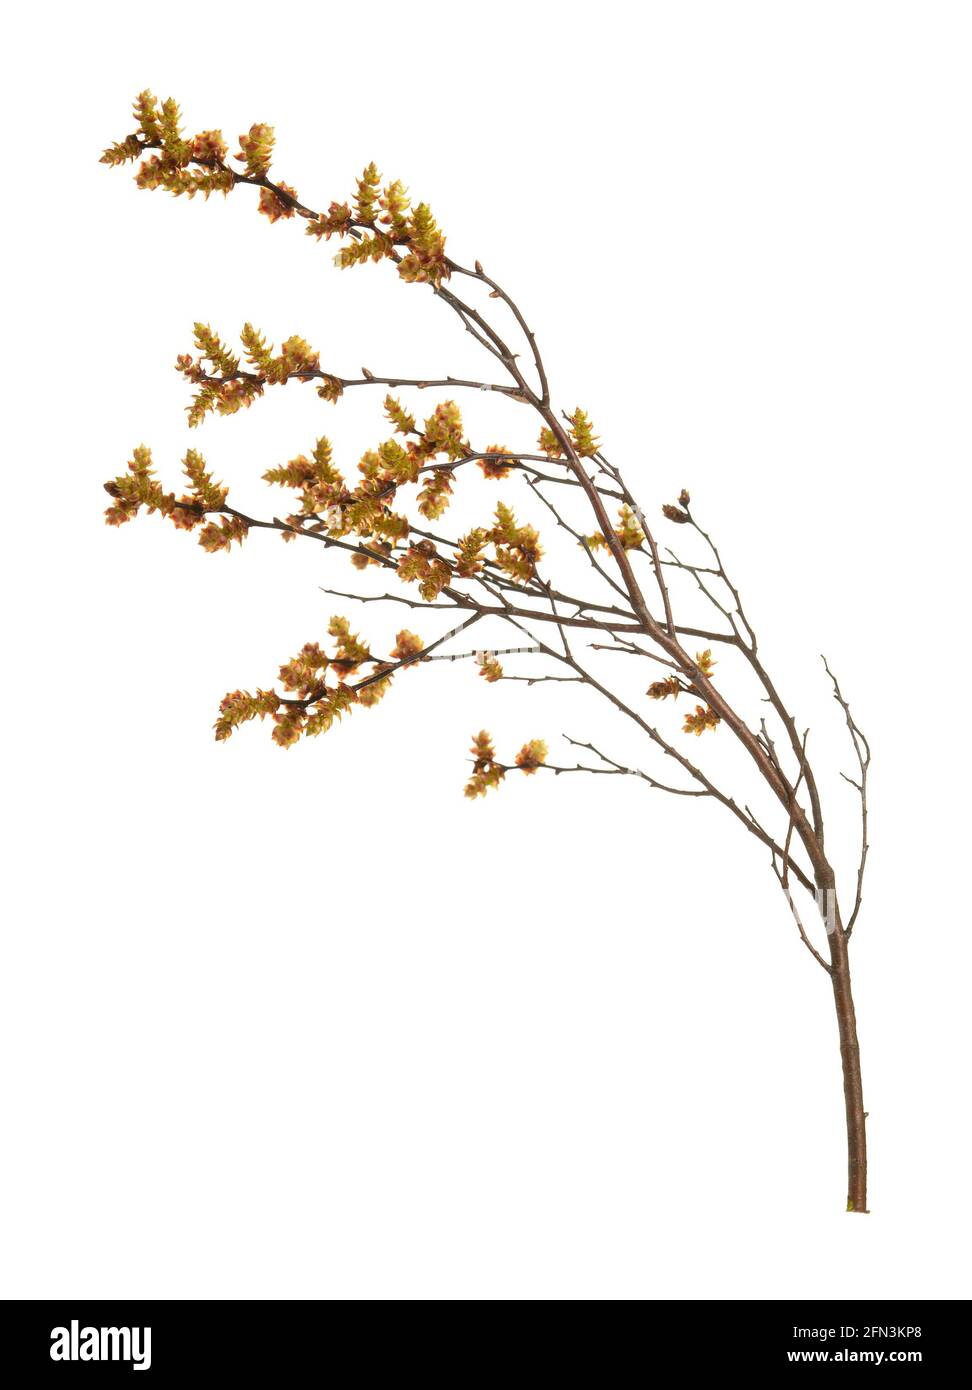 Blooming sweetgale, Myrica gale with catkins isolated on white background Stock Photo